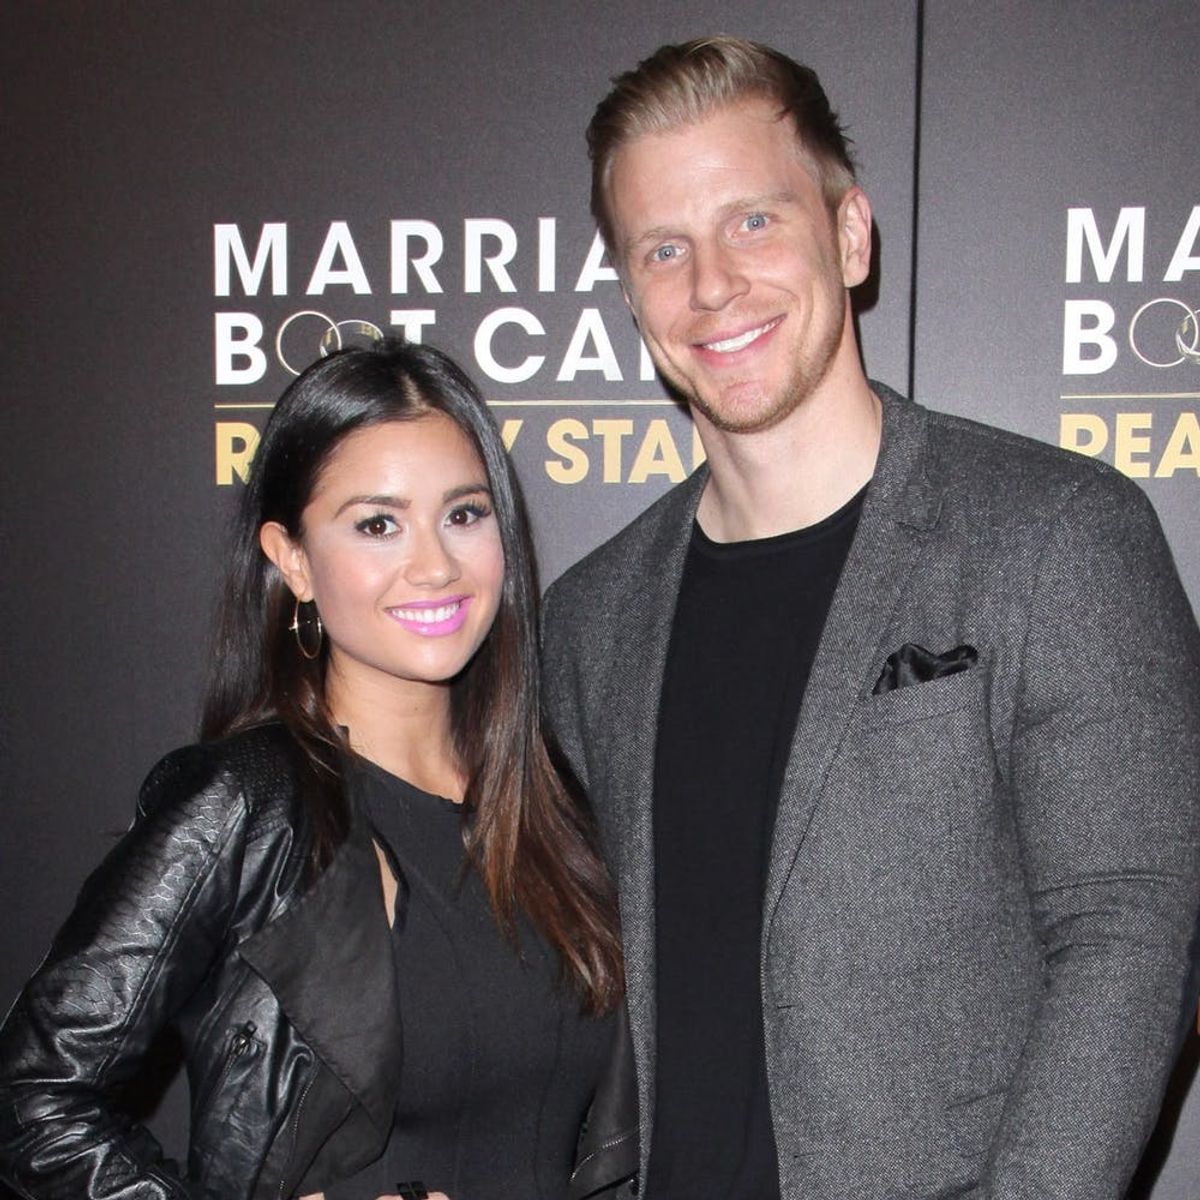 Catherine and Sean Lowe Tell Us Why Rachel Lindsay Would Be Smart to Prolong Her Engagement